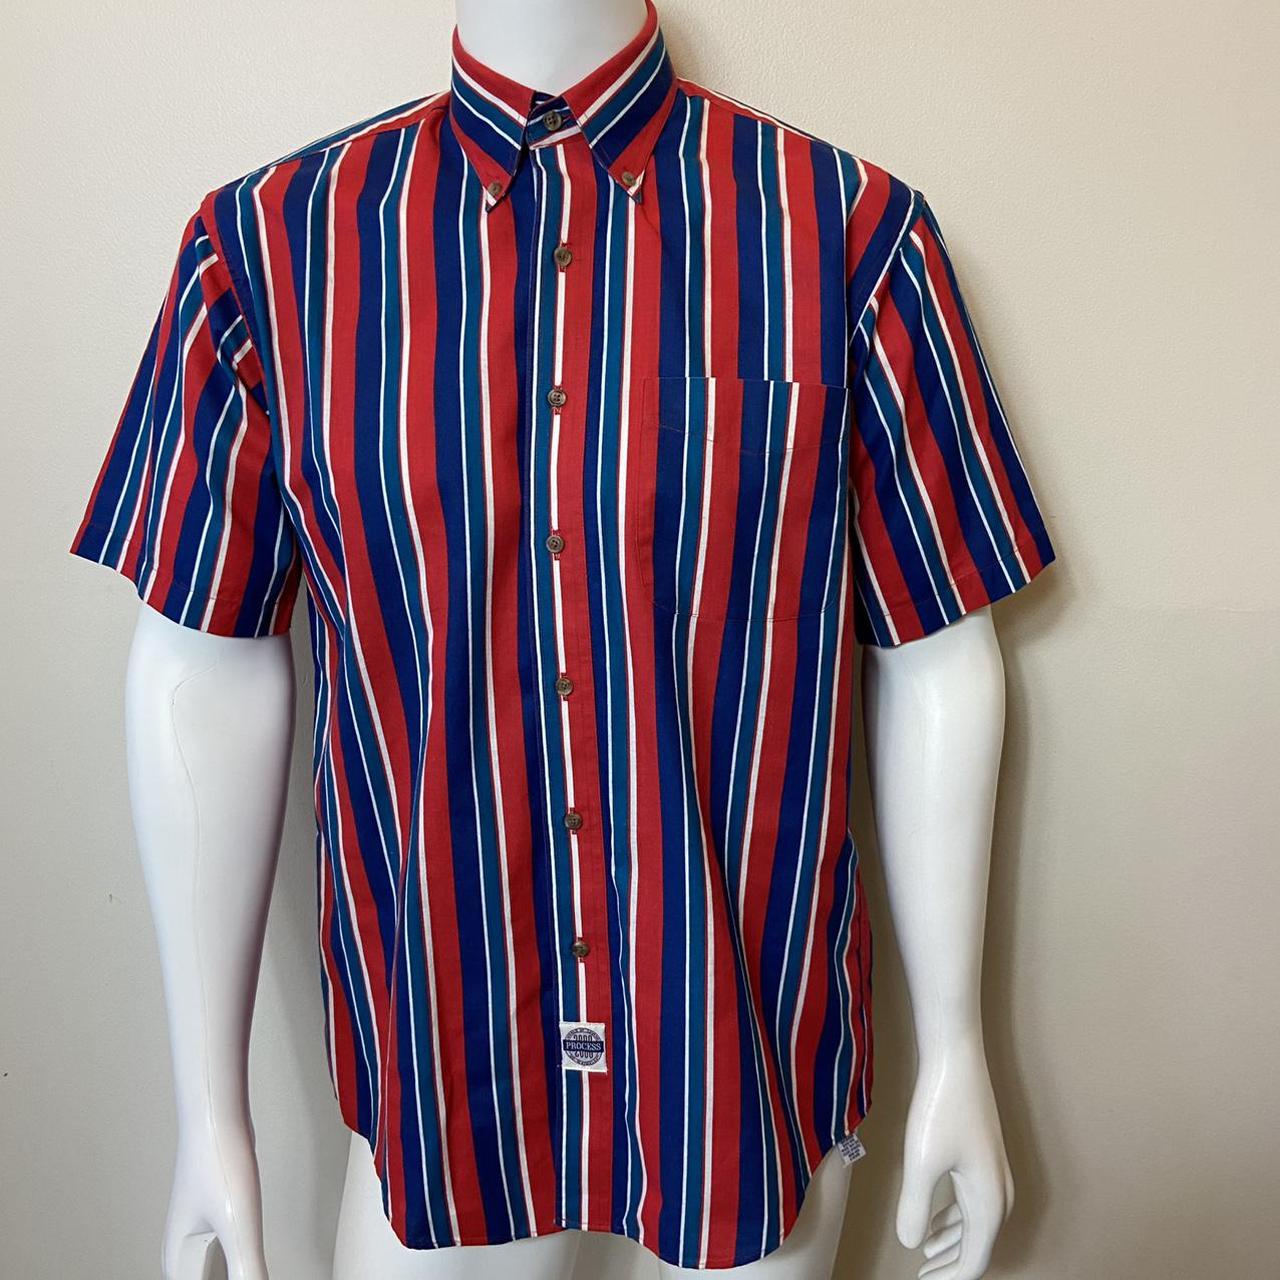 Product Image 2 - VINTAGE 1980s 1990s Striped Shirt